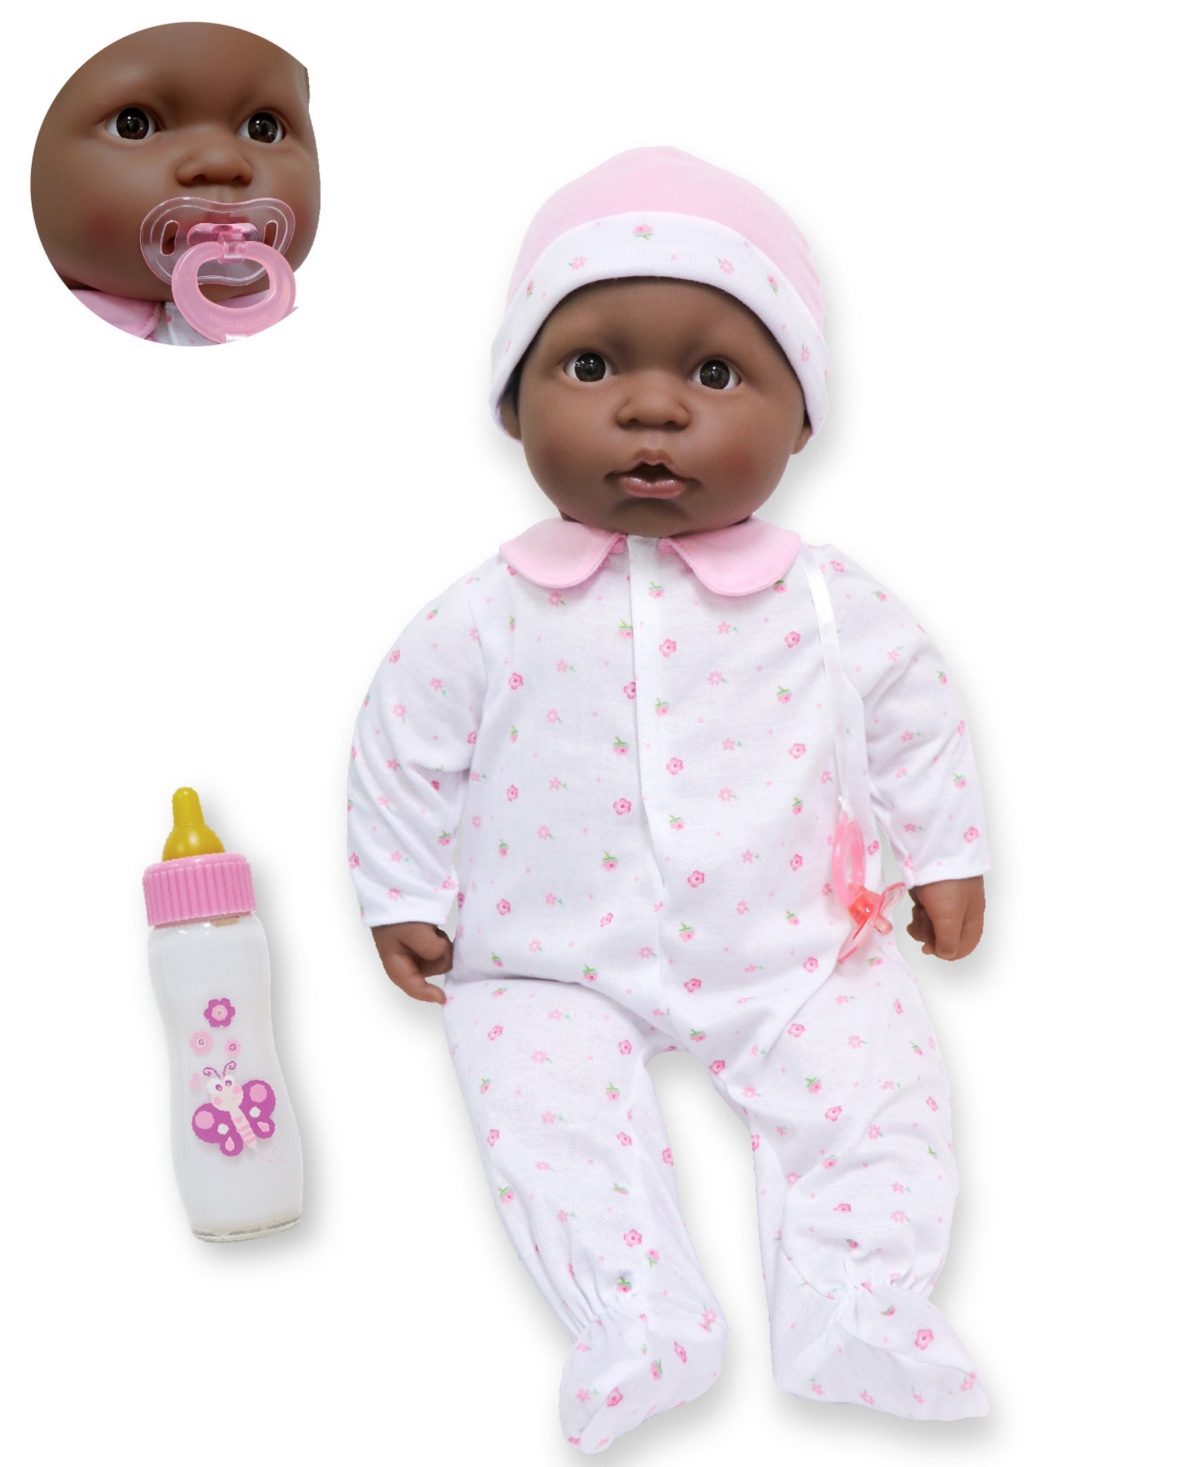 Jc Toys La Baby African American 20" Soft Body Baby Doll Pink Outfit In African American - Pink